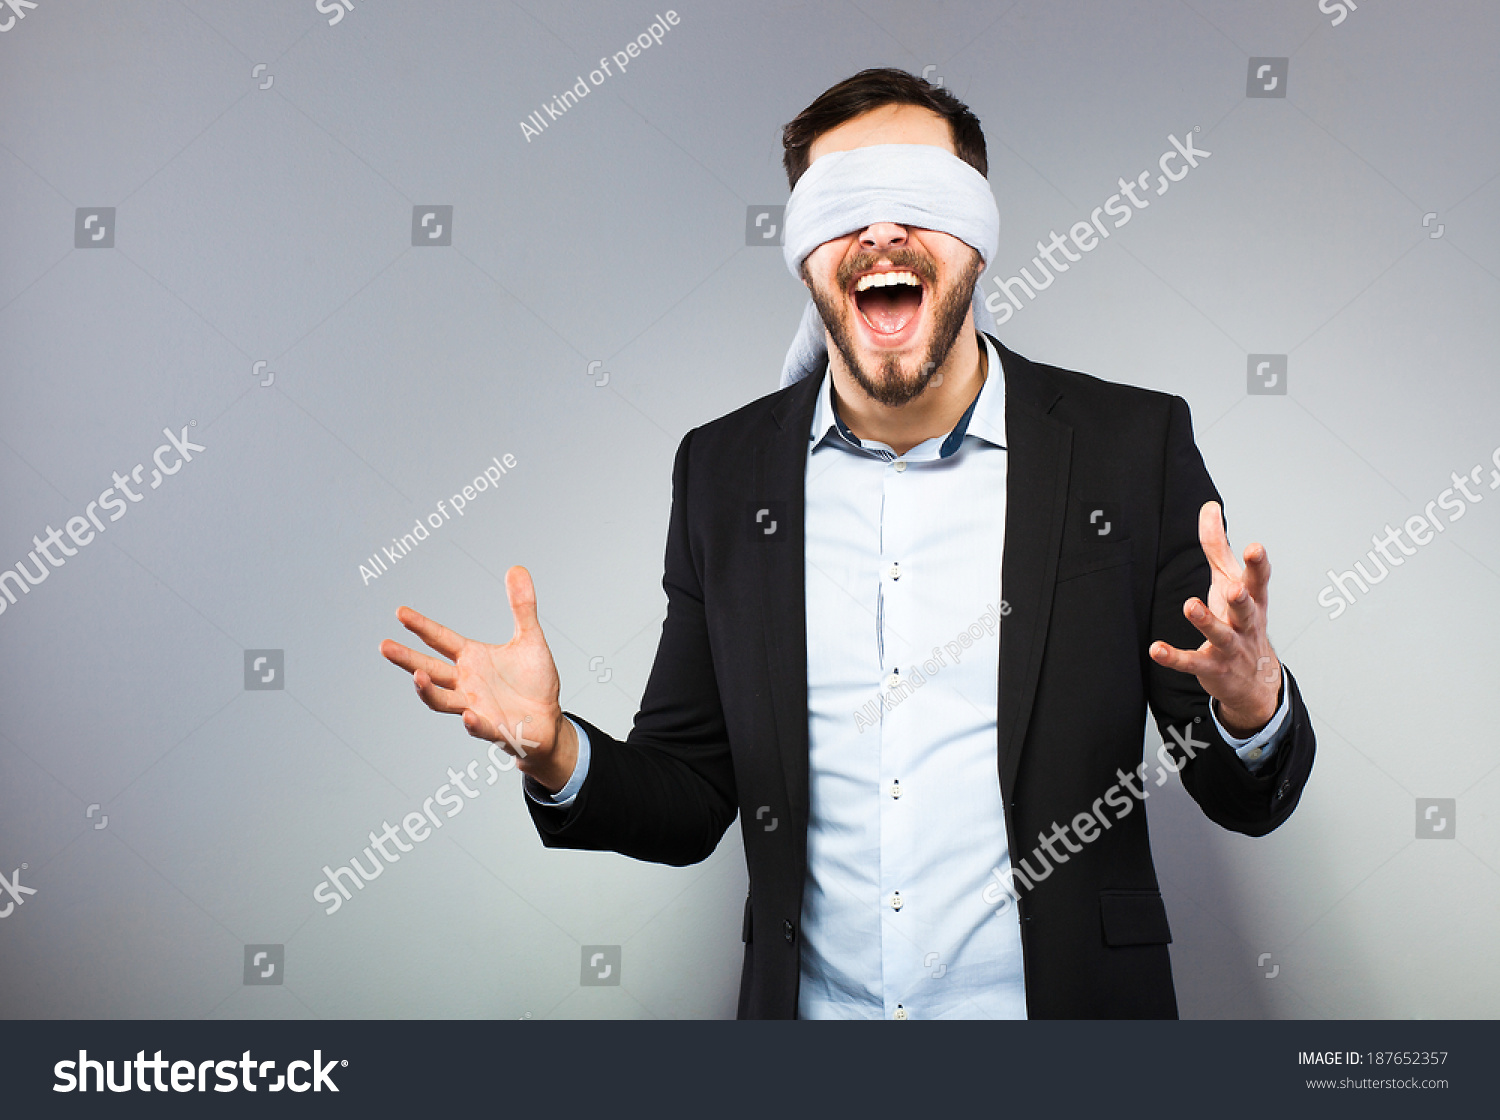 stock-photo-excited-blindfolded-man-in-b